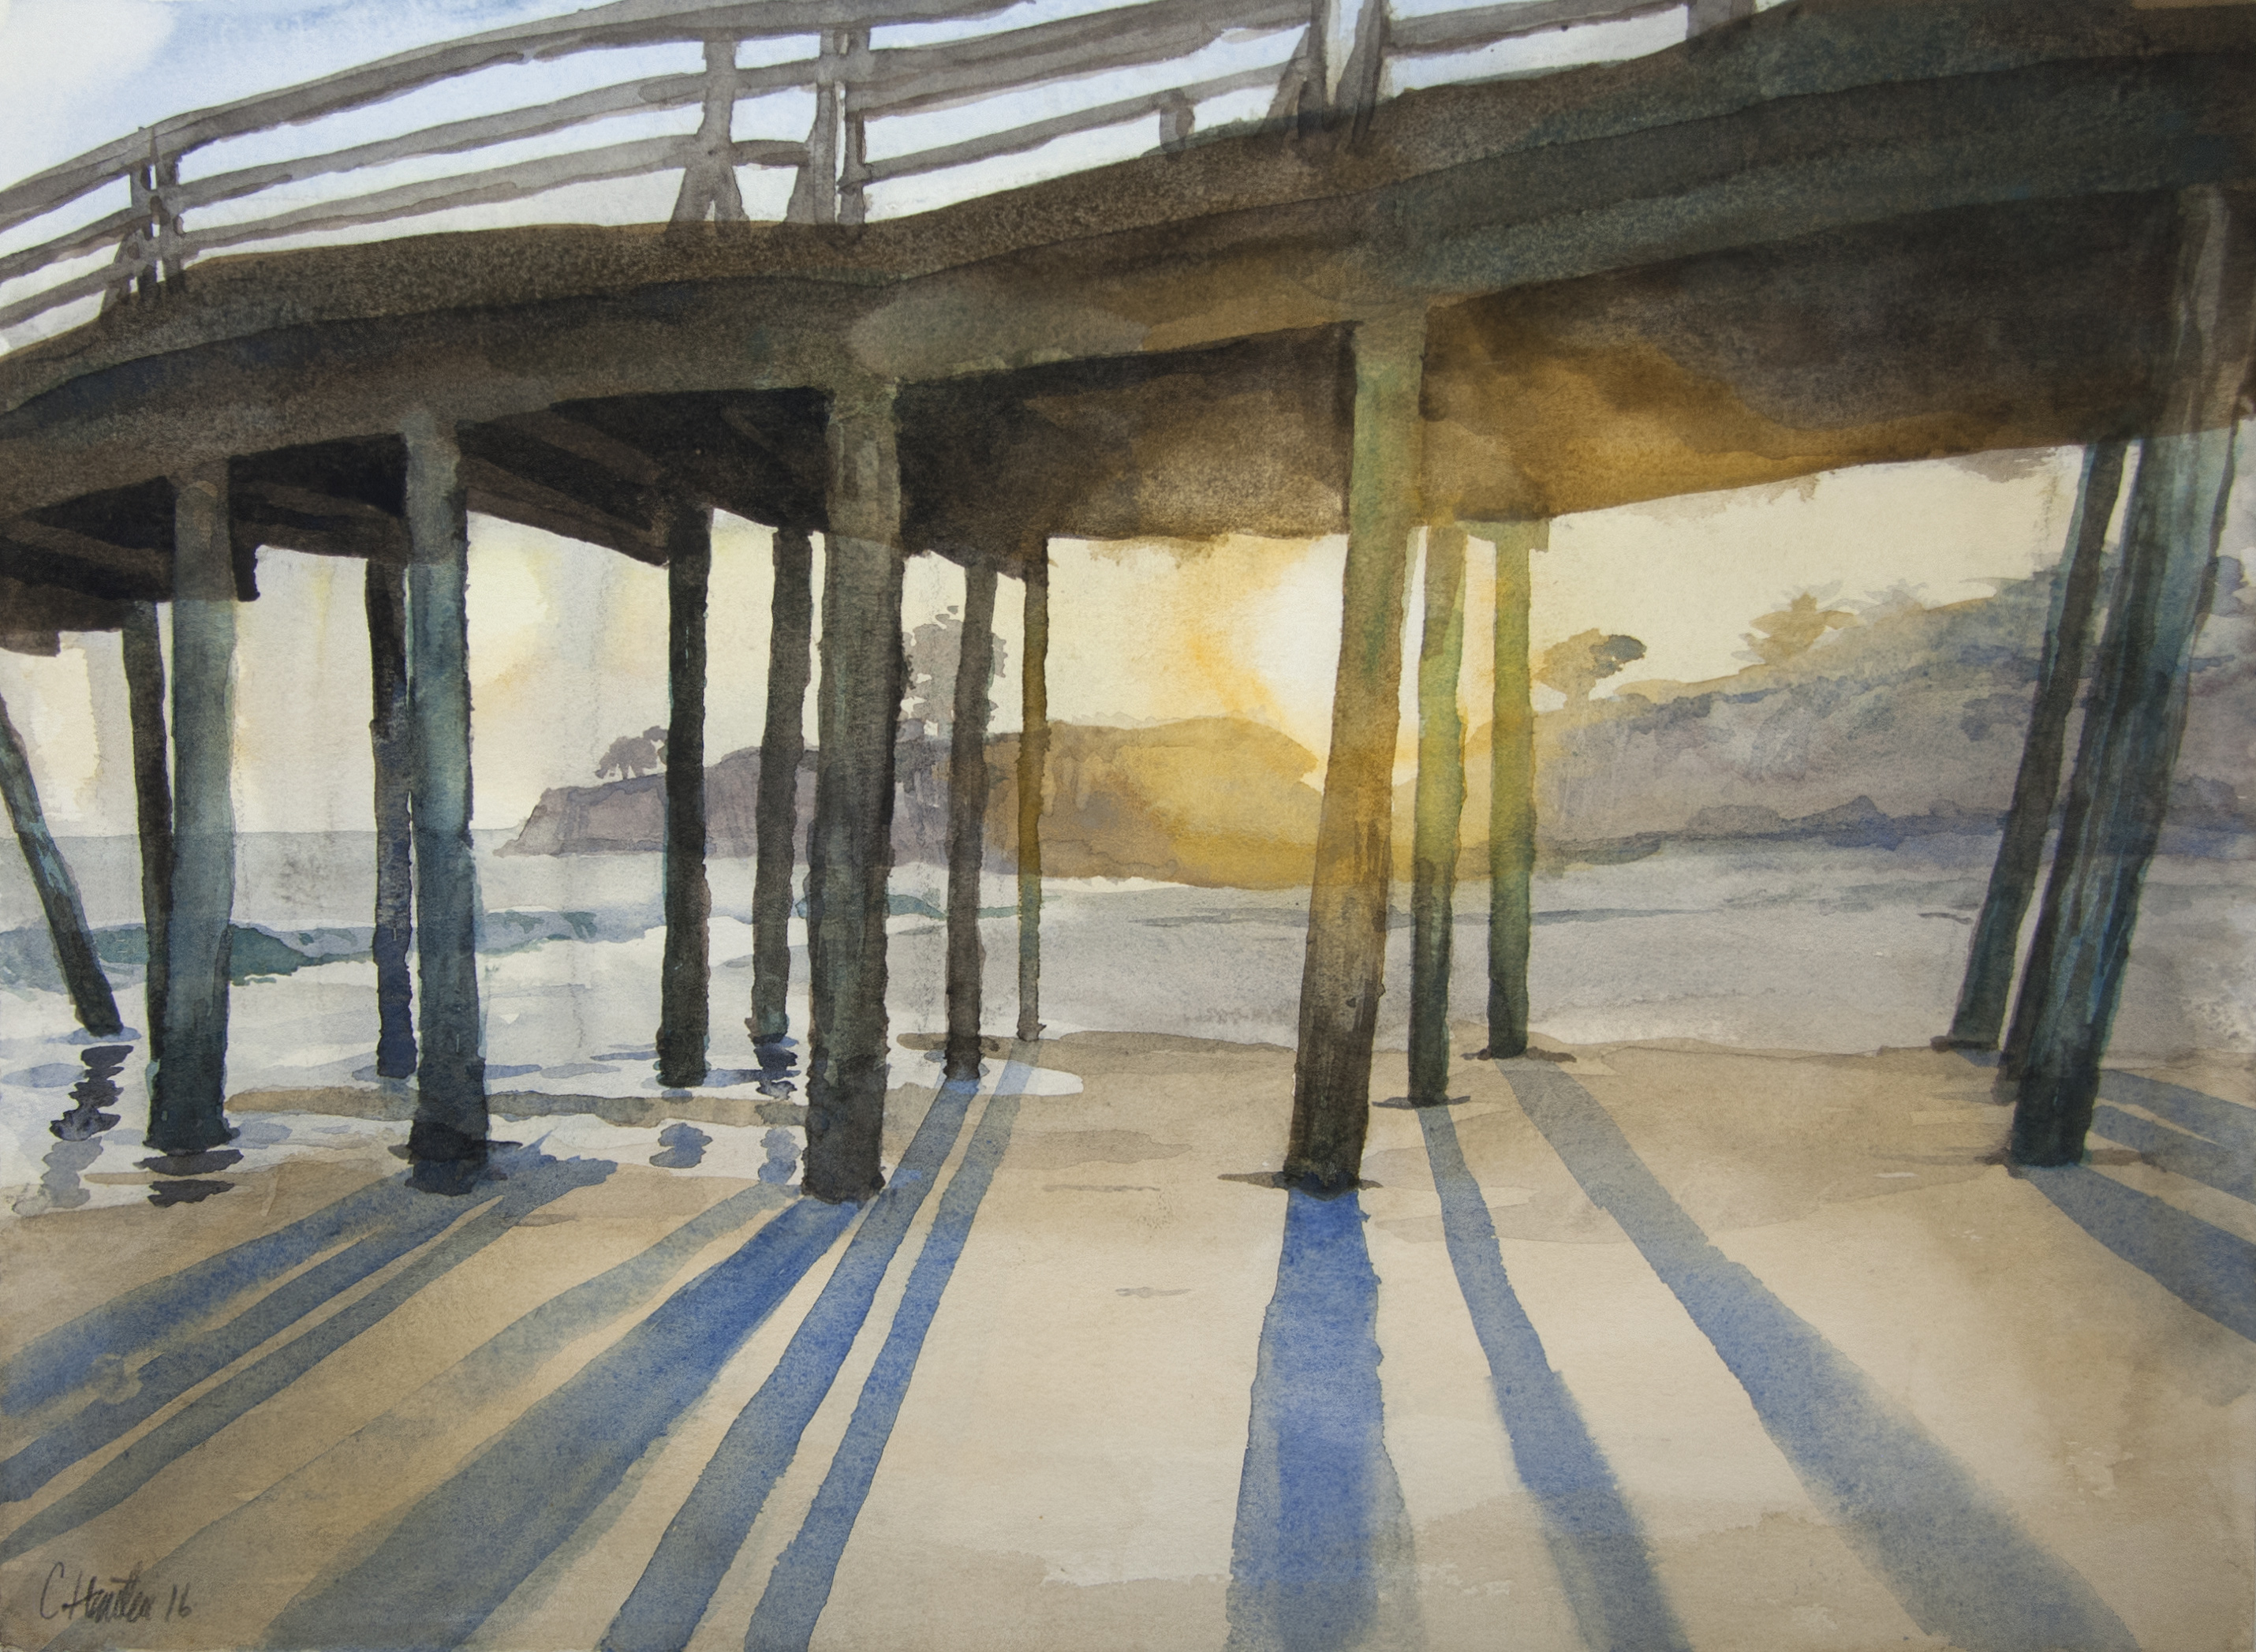 “Sunset Under Pier,” by Cyrus Hunter. First Place